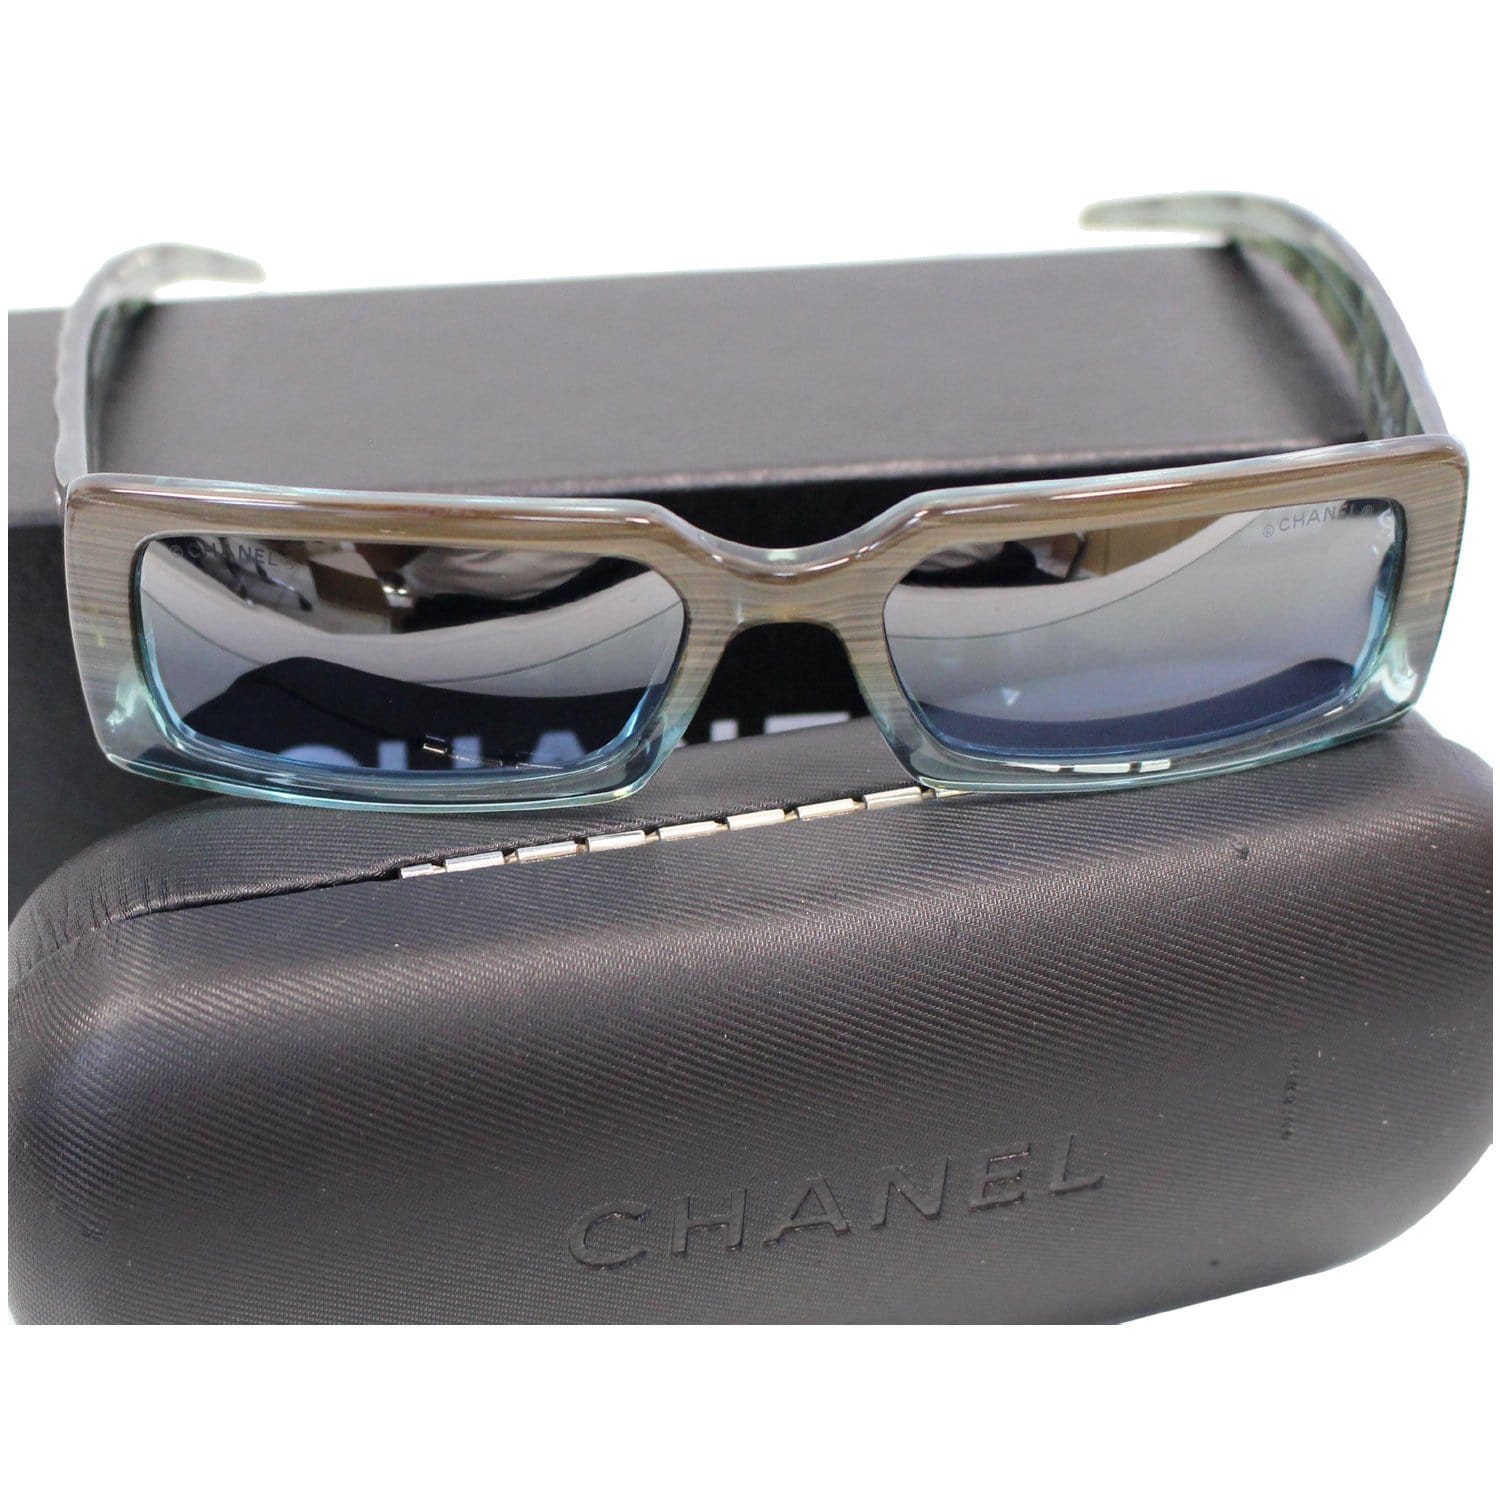 Chanel 2021 Cruise Collection A71046 Green Frame/Gray Gradient Visor  Sunglasses